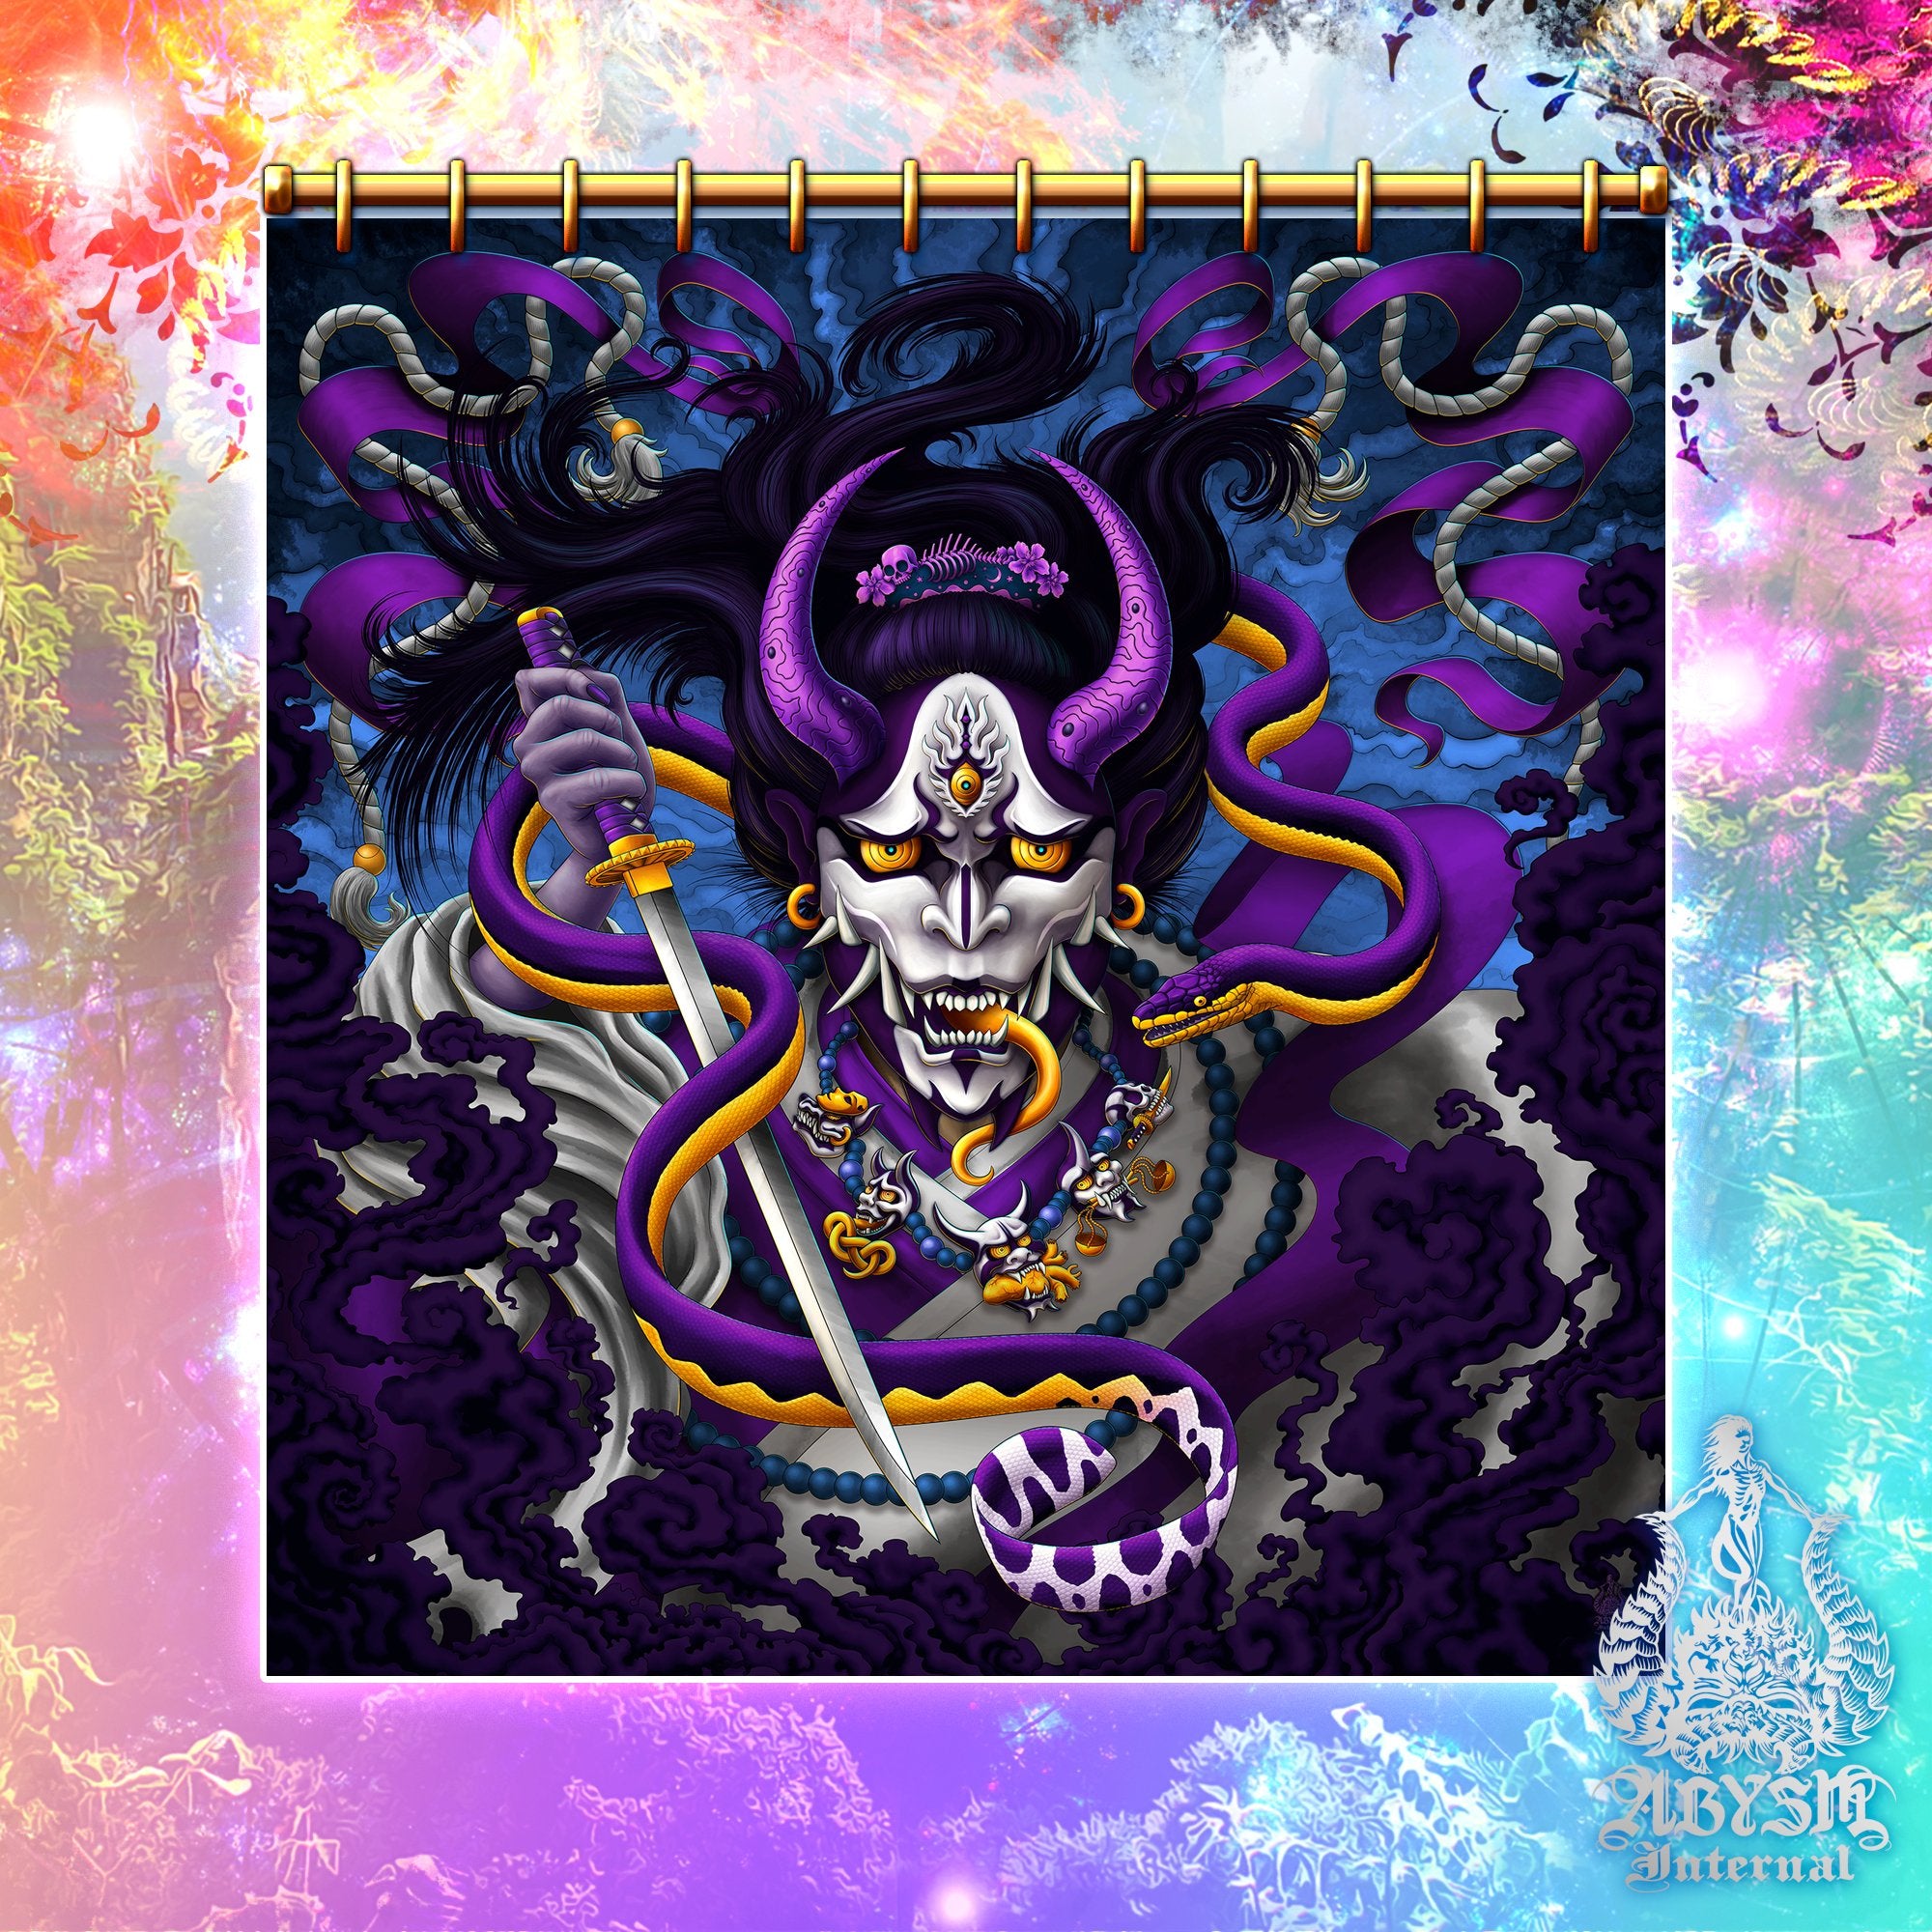 Hannya and Snake Shower Curtain, 71x74 inches, Japanese Demon, Youkai Anime and Gamer Bathroom Decor - Blue Purple - Abysm Internal